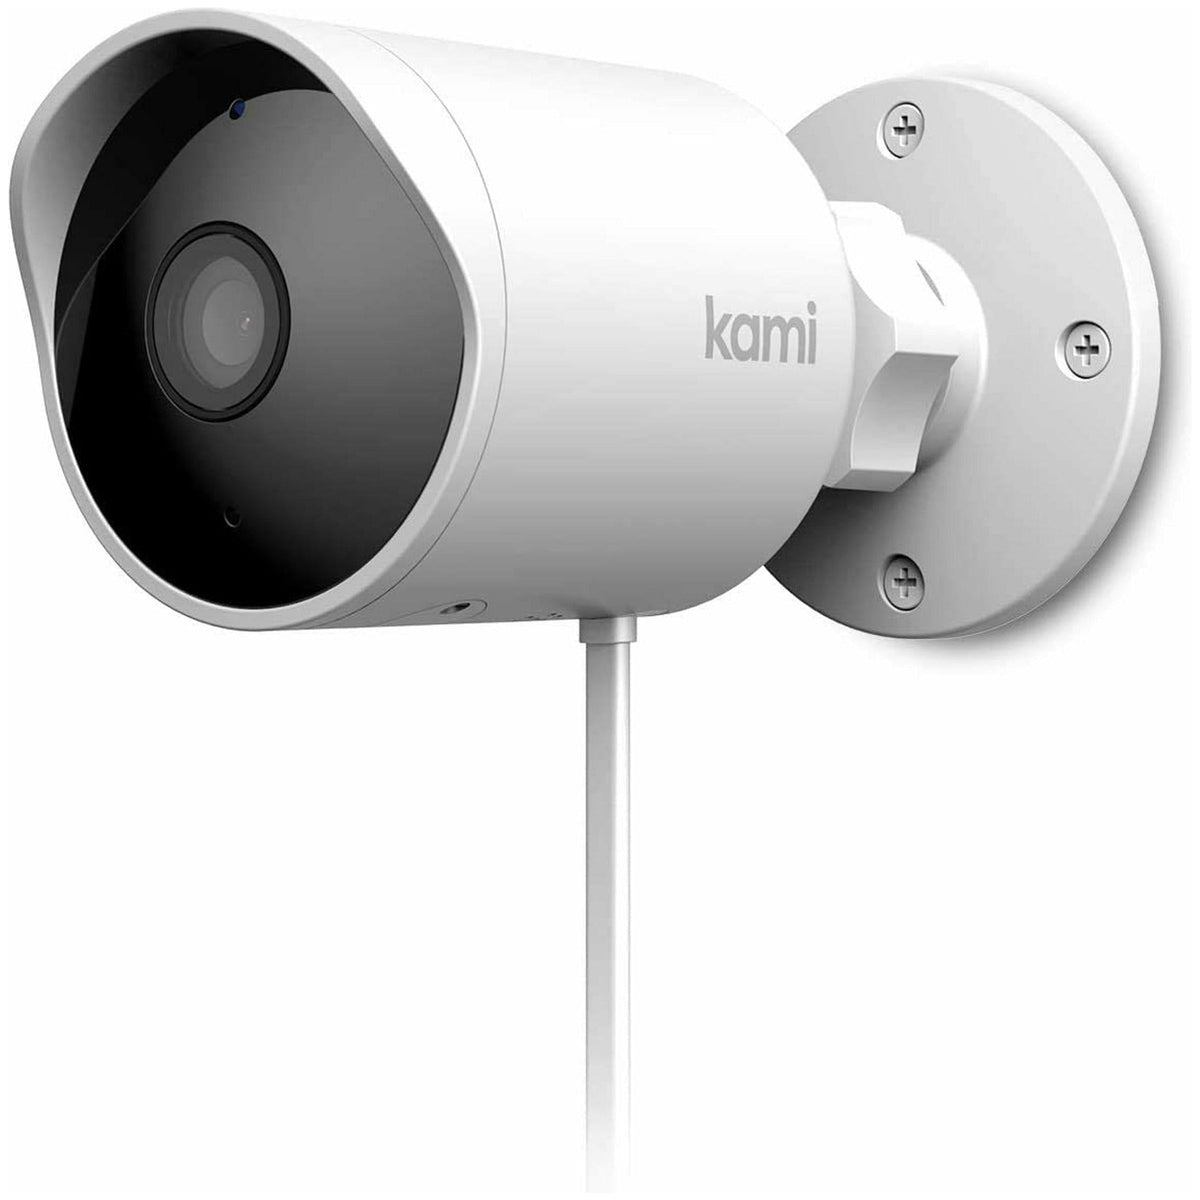 Kami Smart Outdoor Wired Security Camera - White | KAMI-H31-YHS3119 (7558571163836)